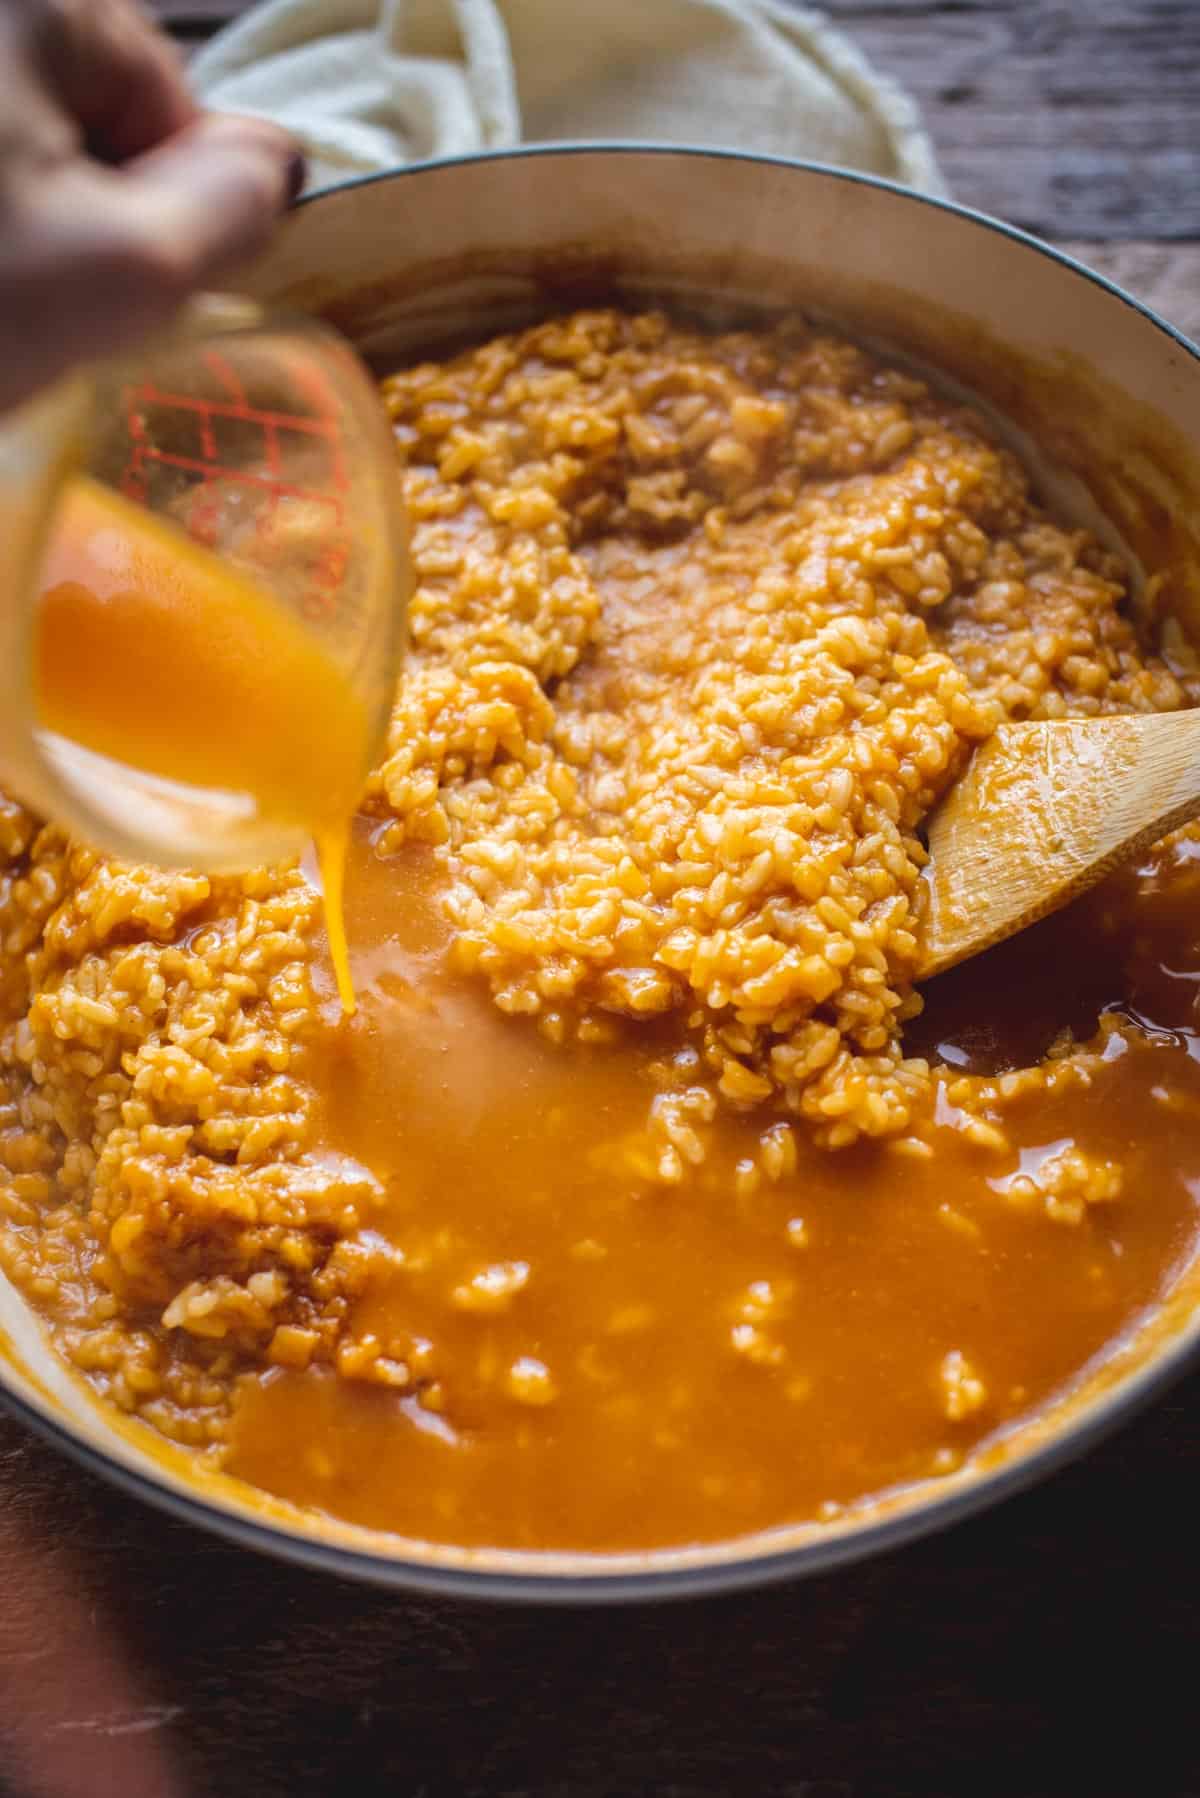 A jug containing more stock and pumpkin is being poured into the pot holding the risotto. The wooden spoon is inside the mixture to stir in the liquid.